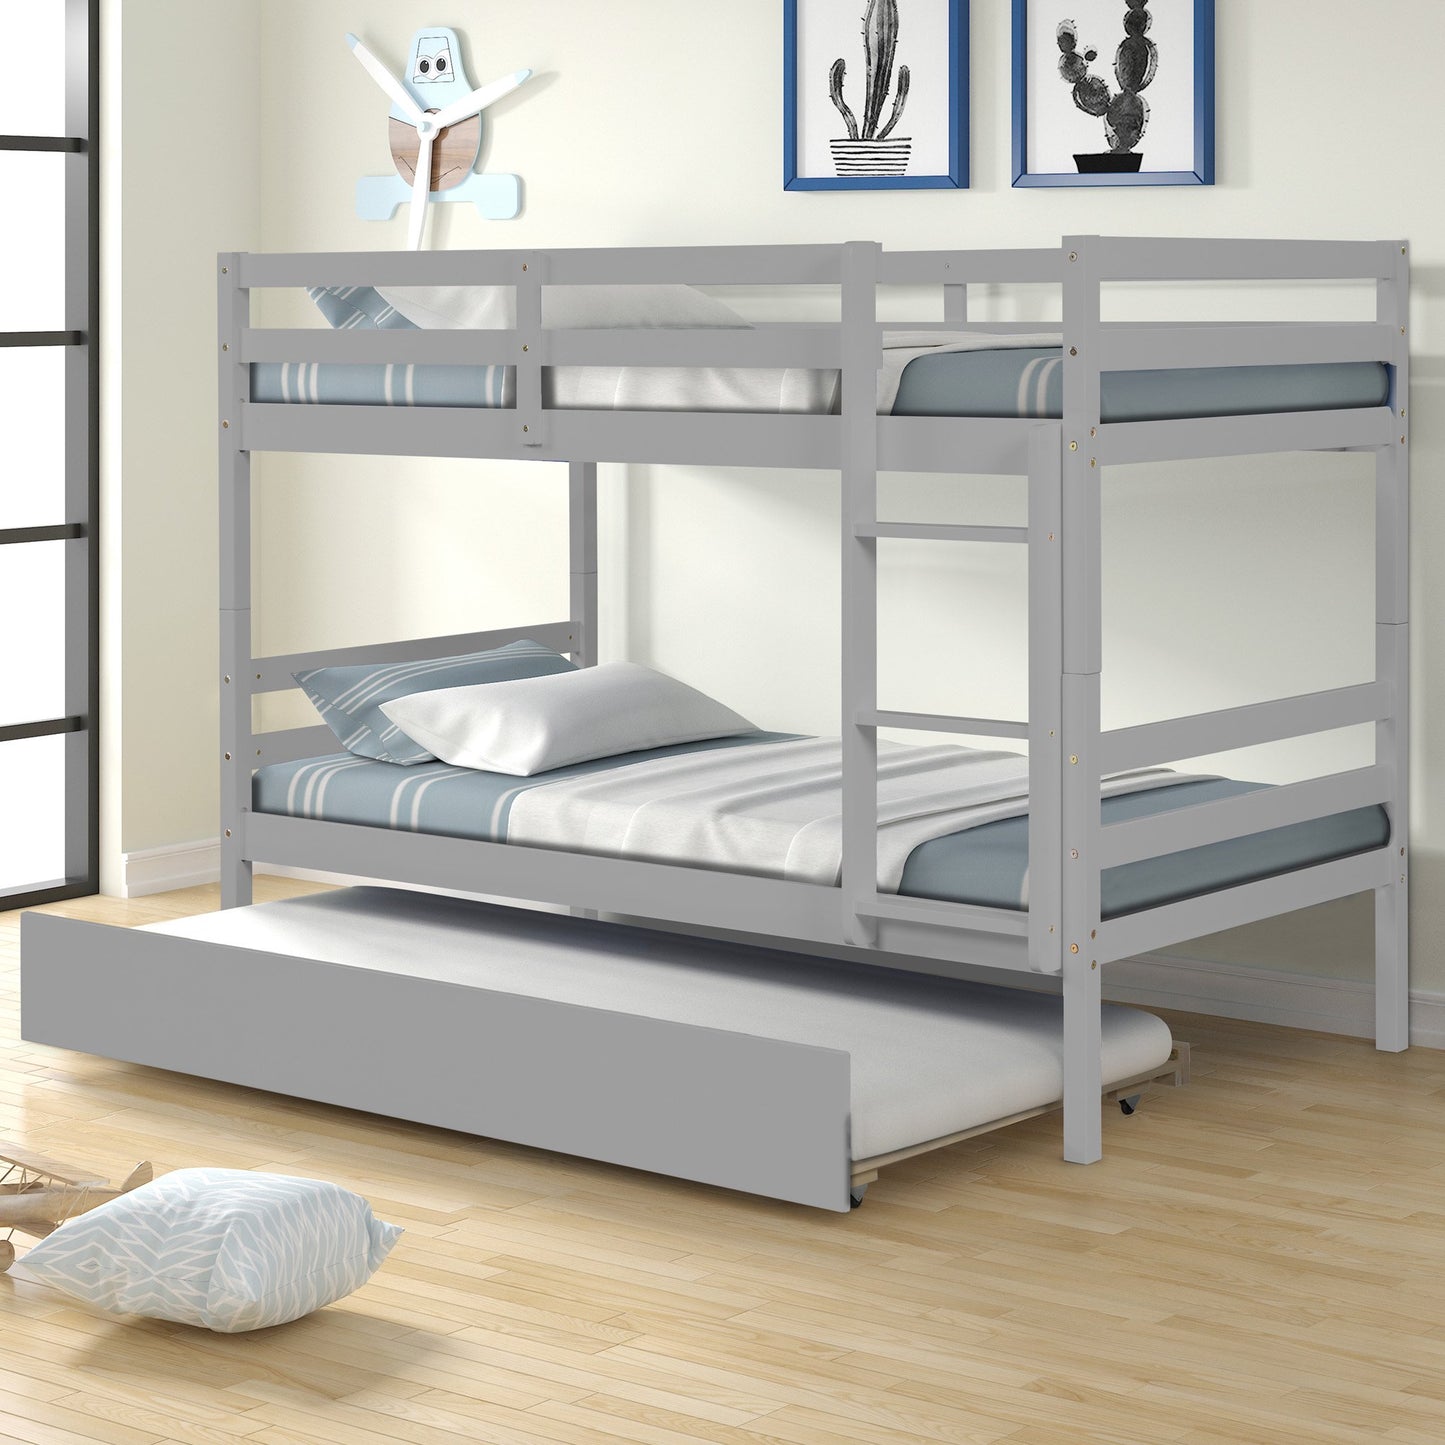 Twin over Twin Bunk Bed with Trundle, Triple Bunk Bed Frame Twin Size with Safety Rail, Can Converted into 2 Beds, Gray